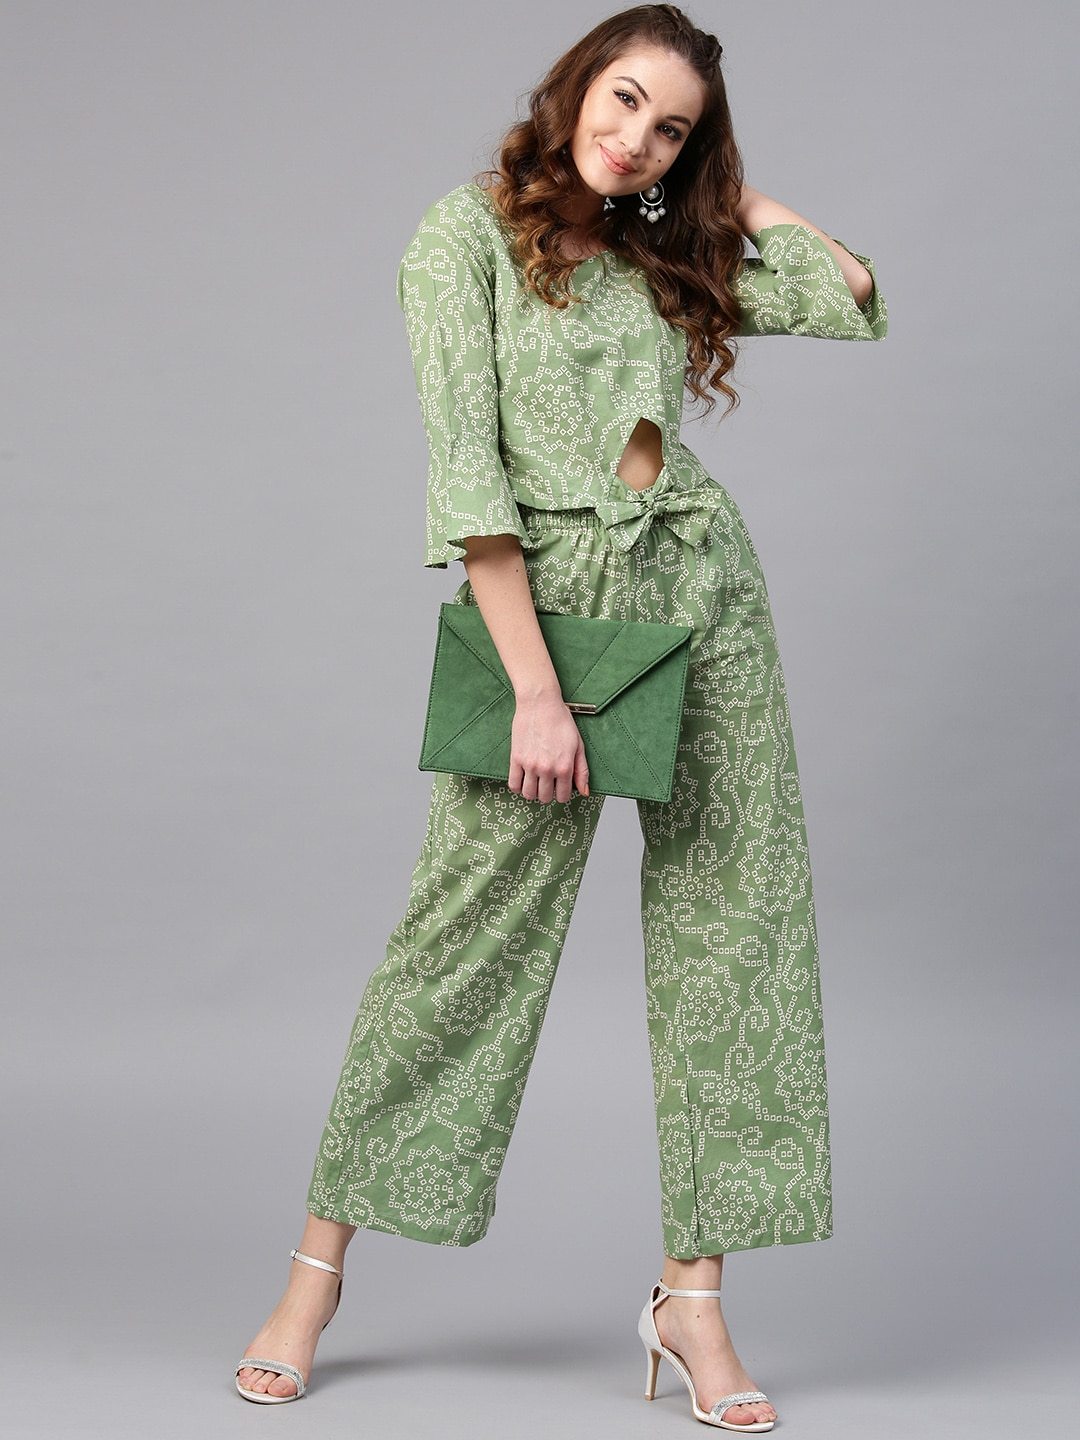 Women's  Green & White Printed Top with Palazzos - AKS